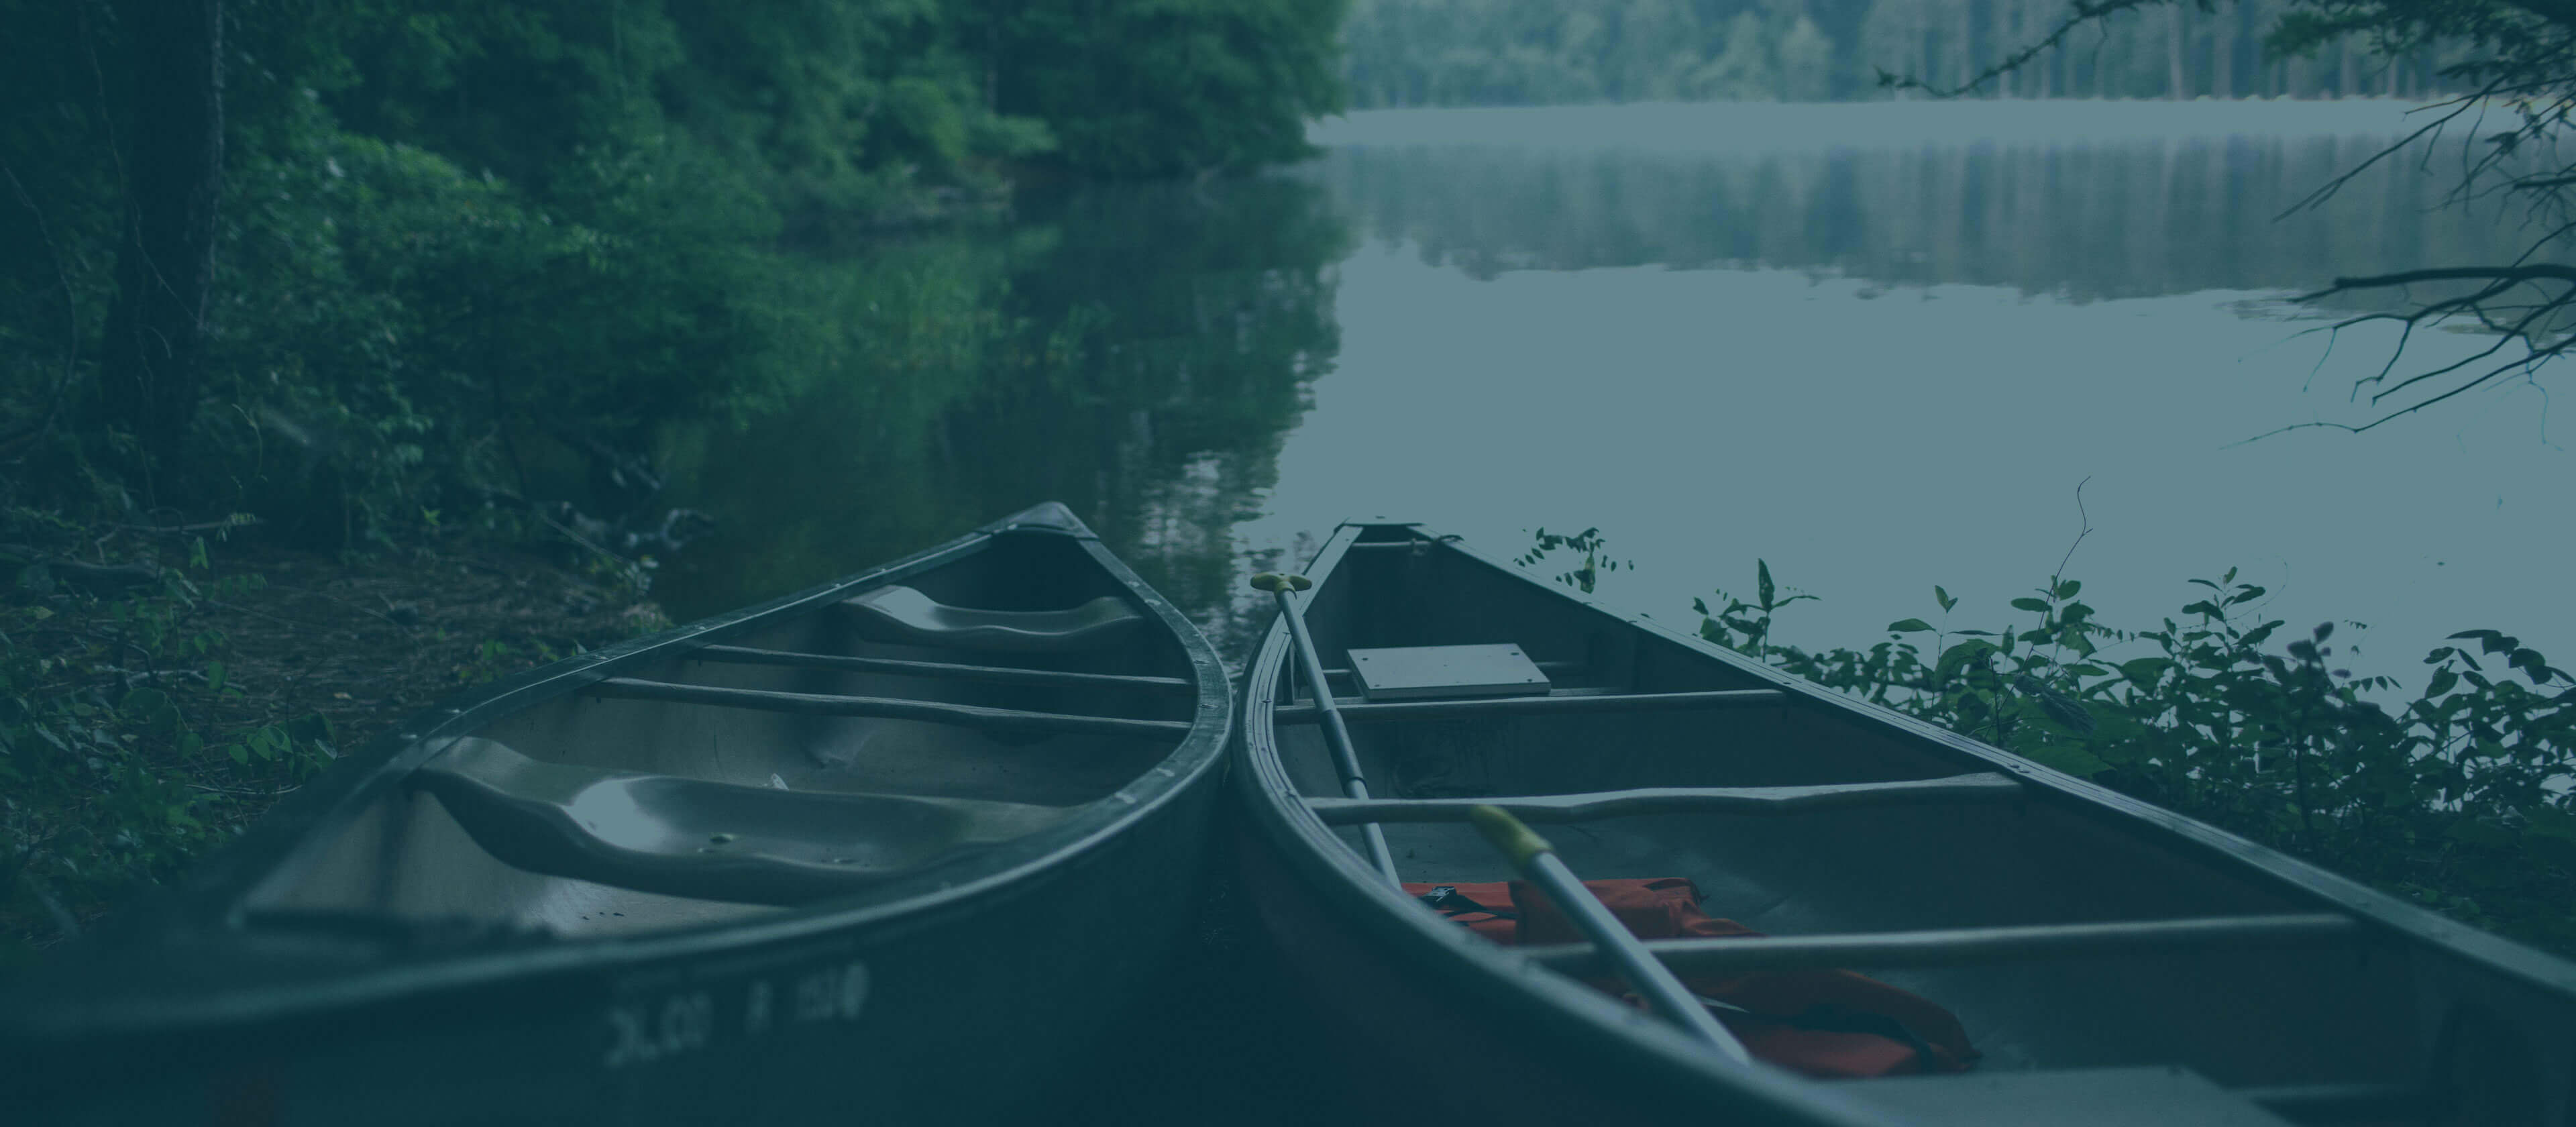 Two canoes by a lake